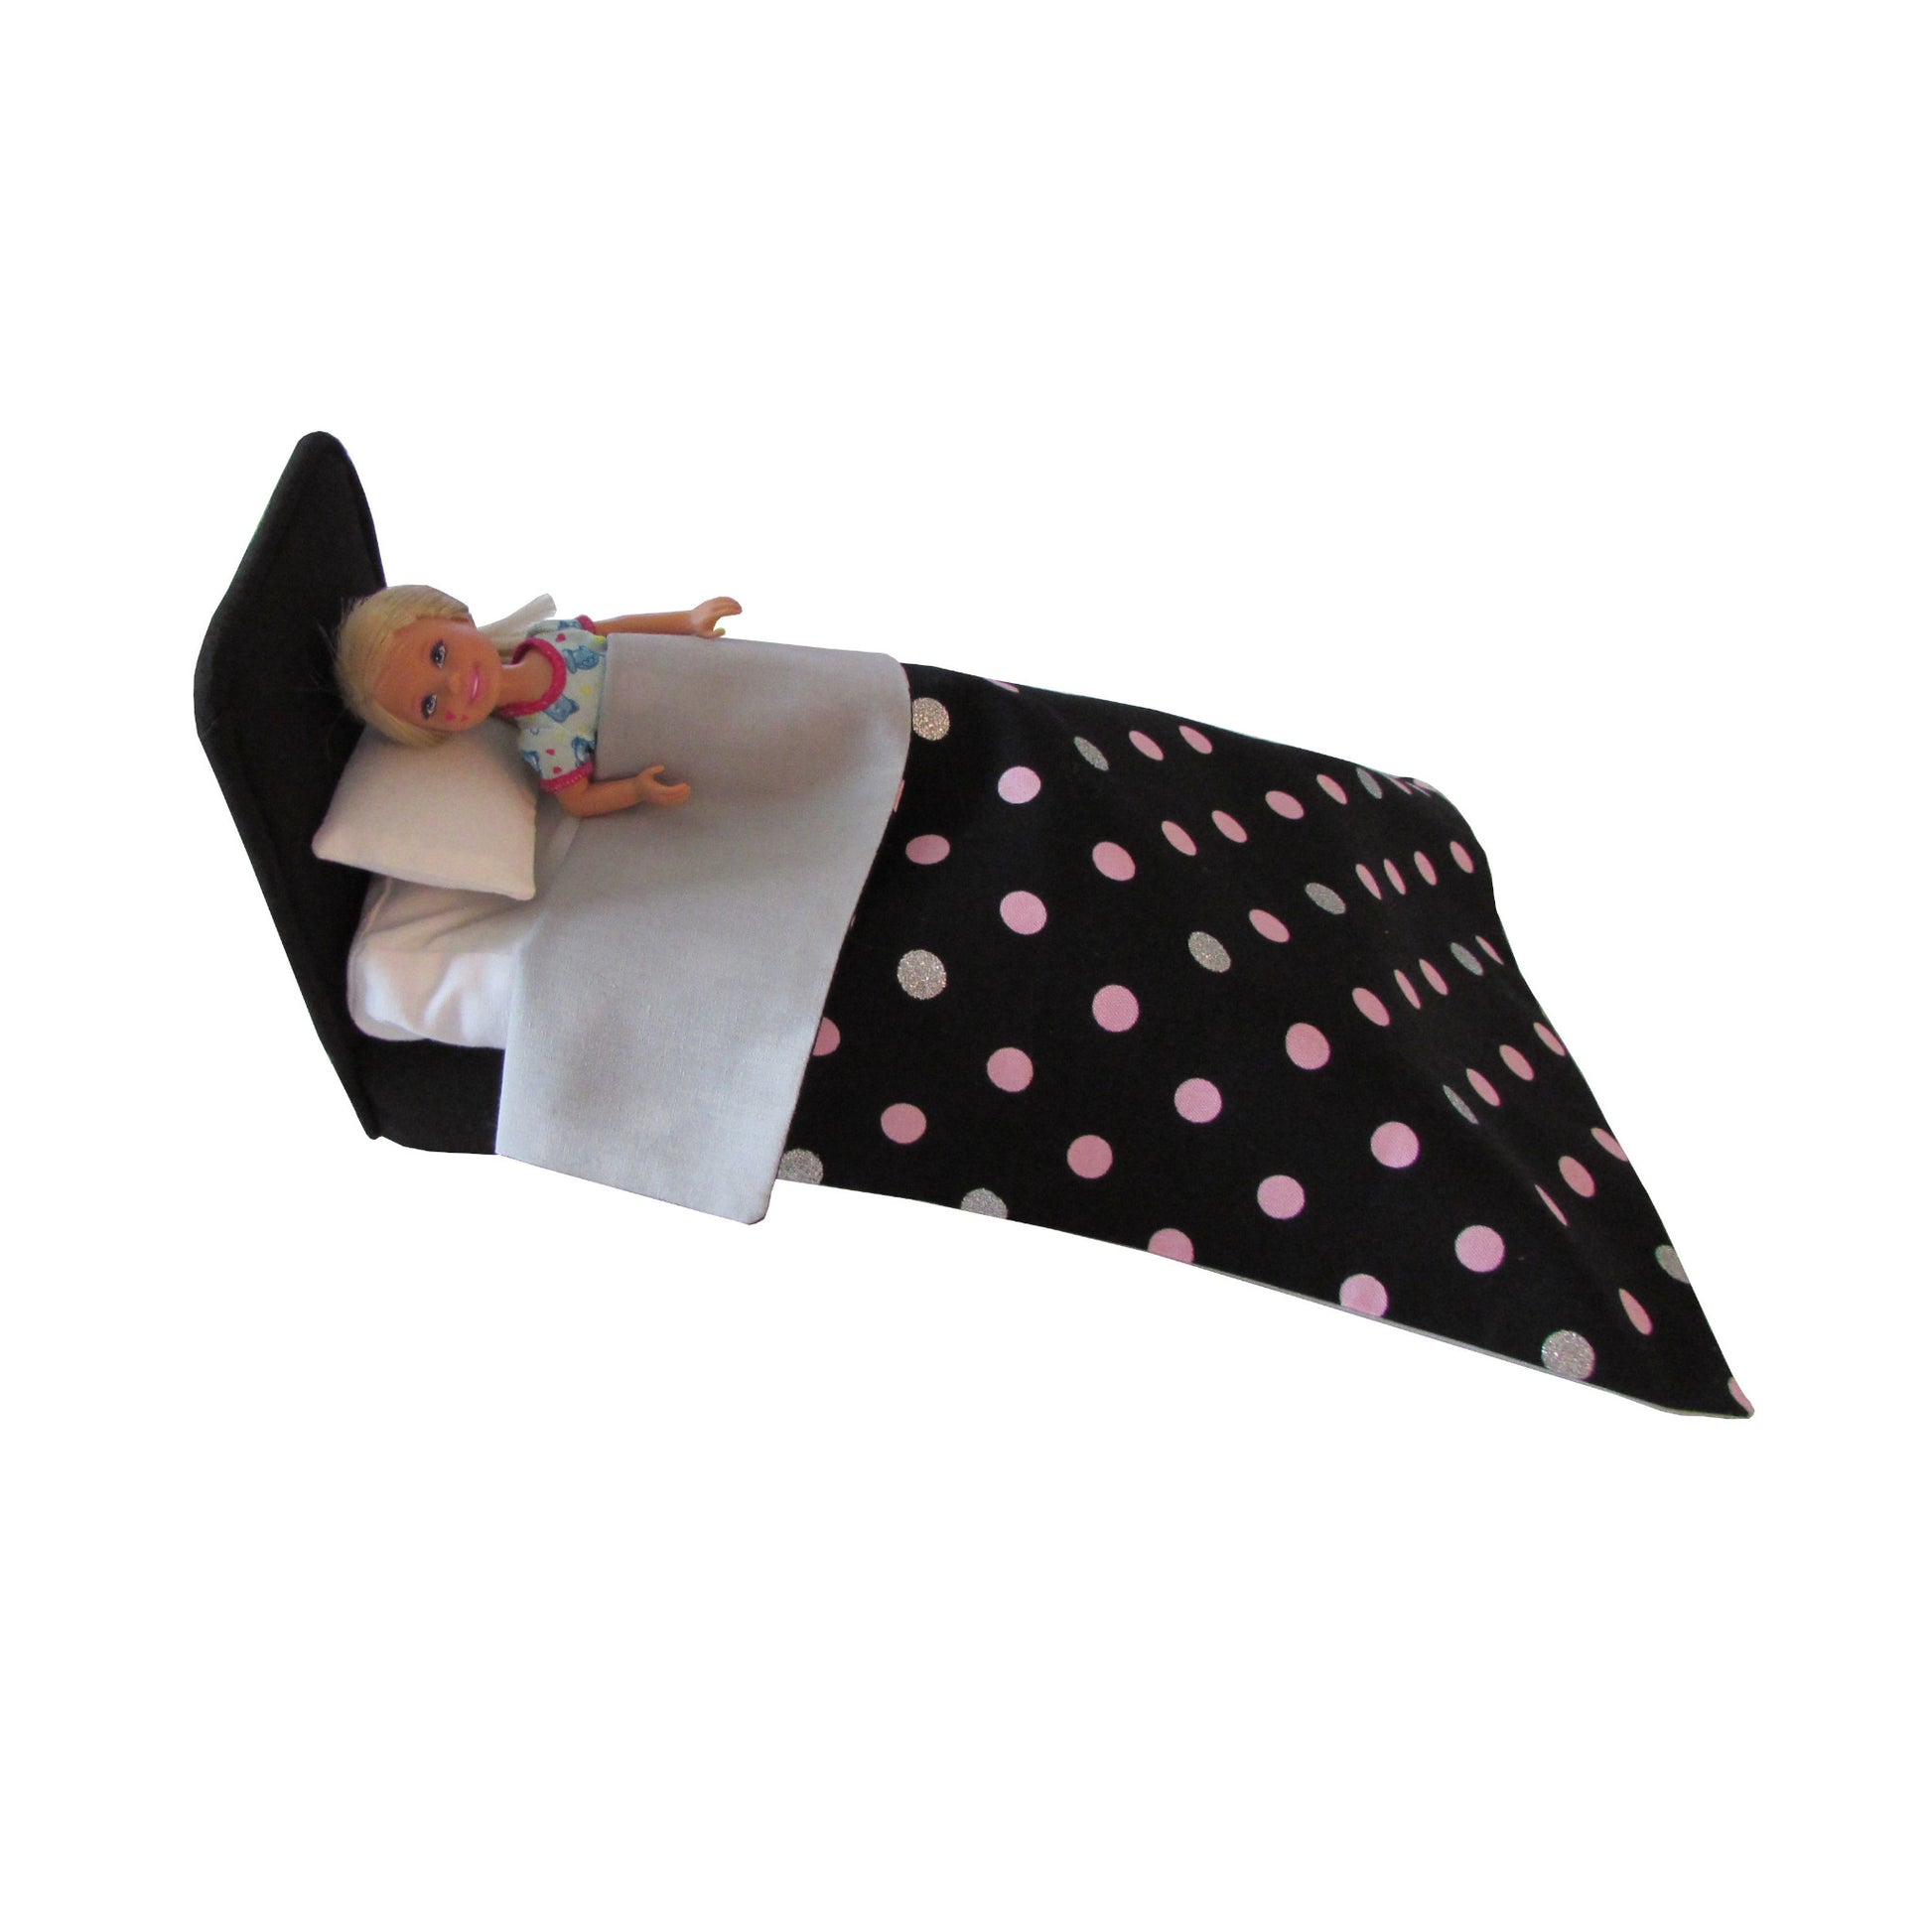 Black Doll Bed and Dots Doll Bedding for 6.5-inch dolls with doll